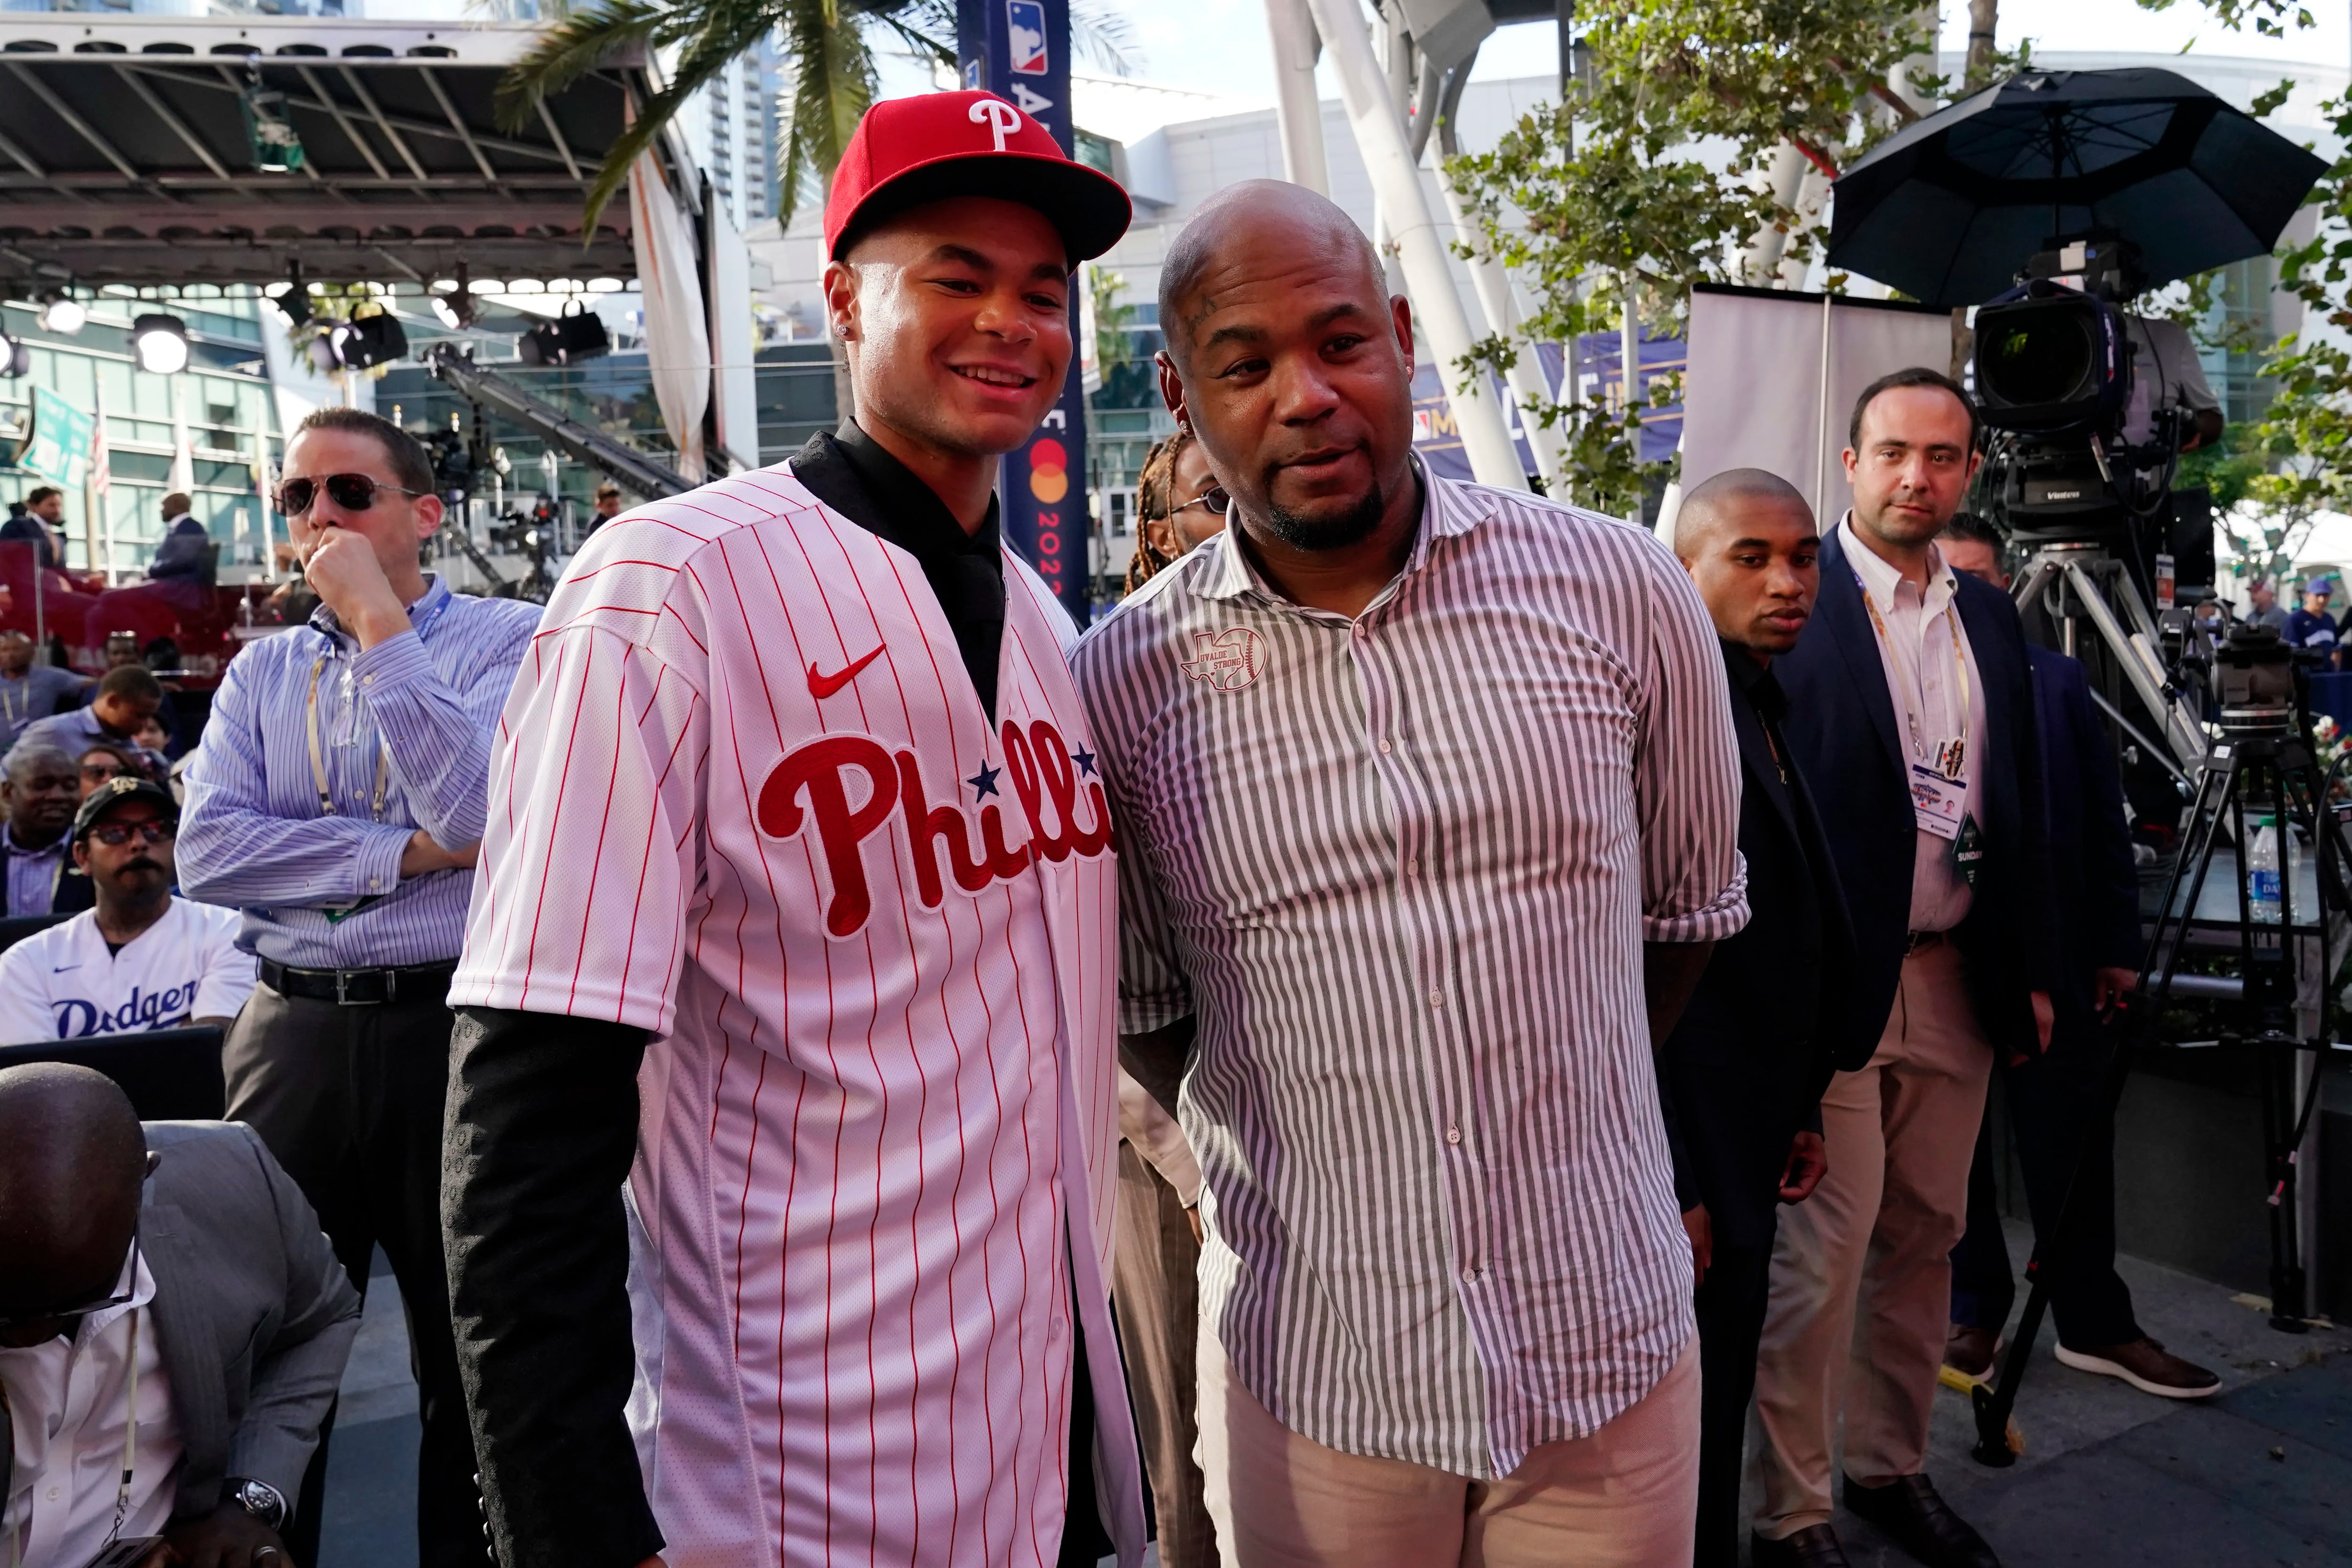 MLB draft: Phillies pick Justin Crawford, son of former major leaguer